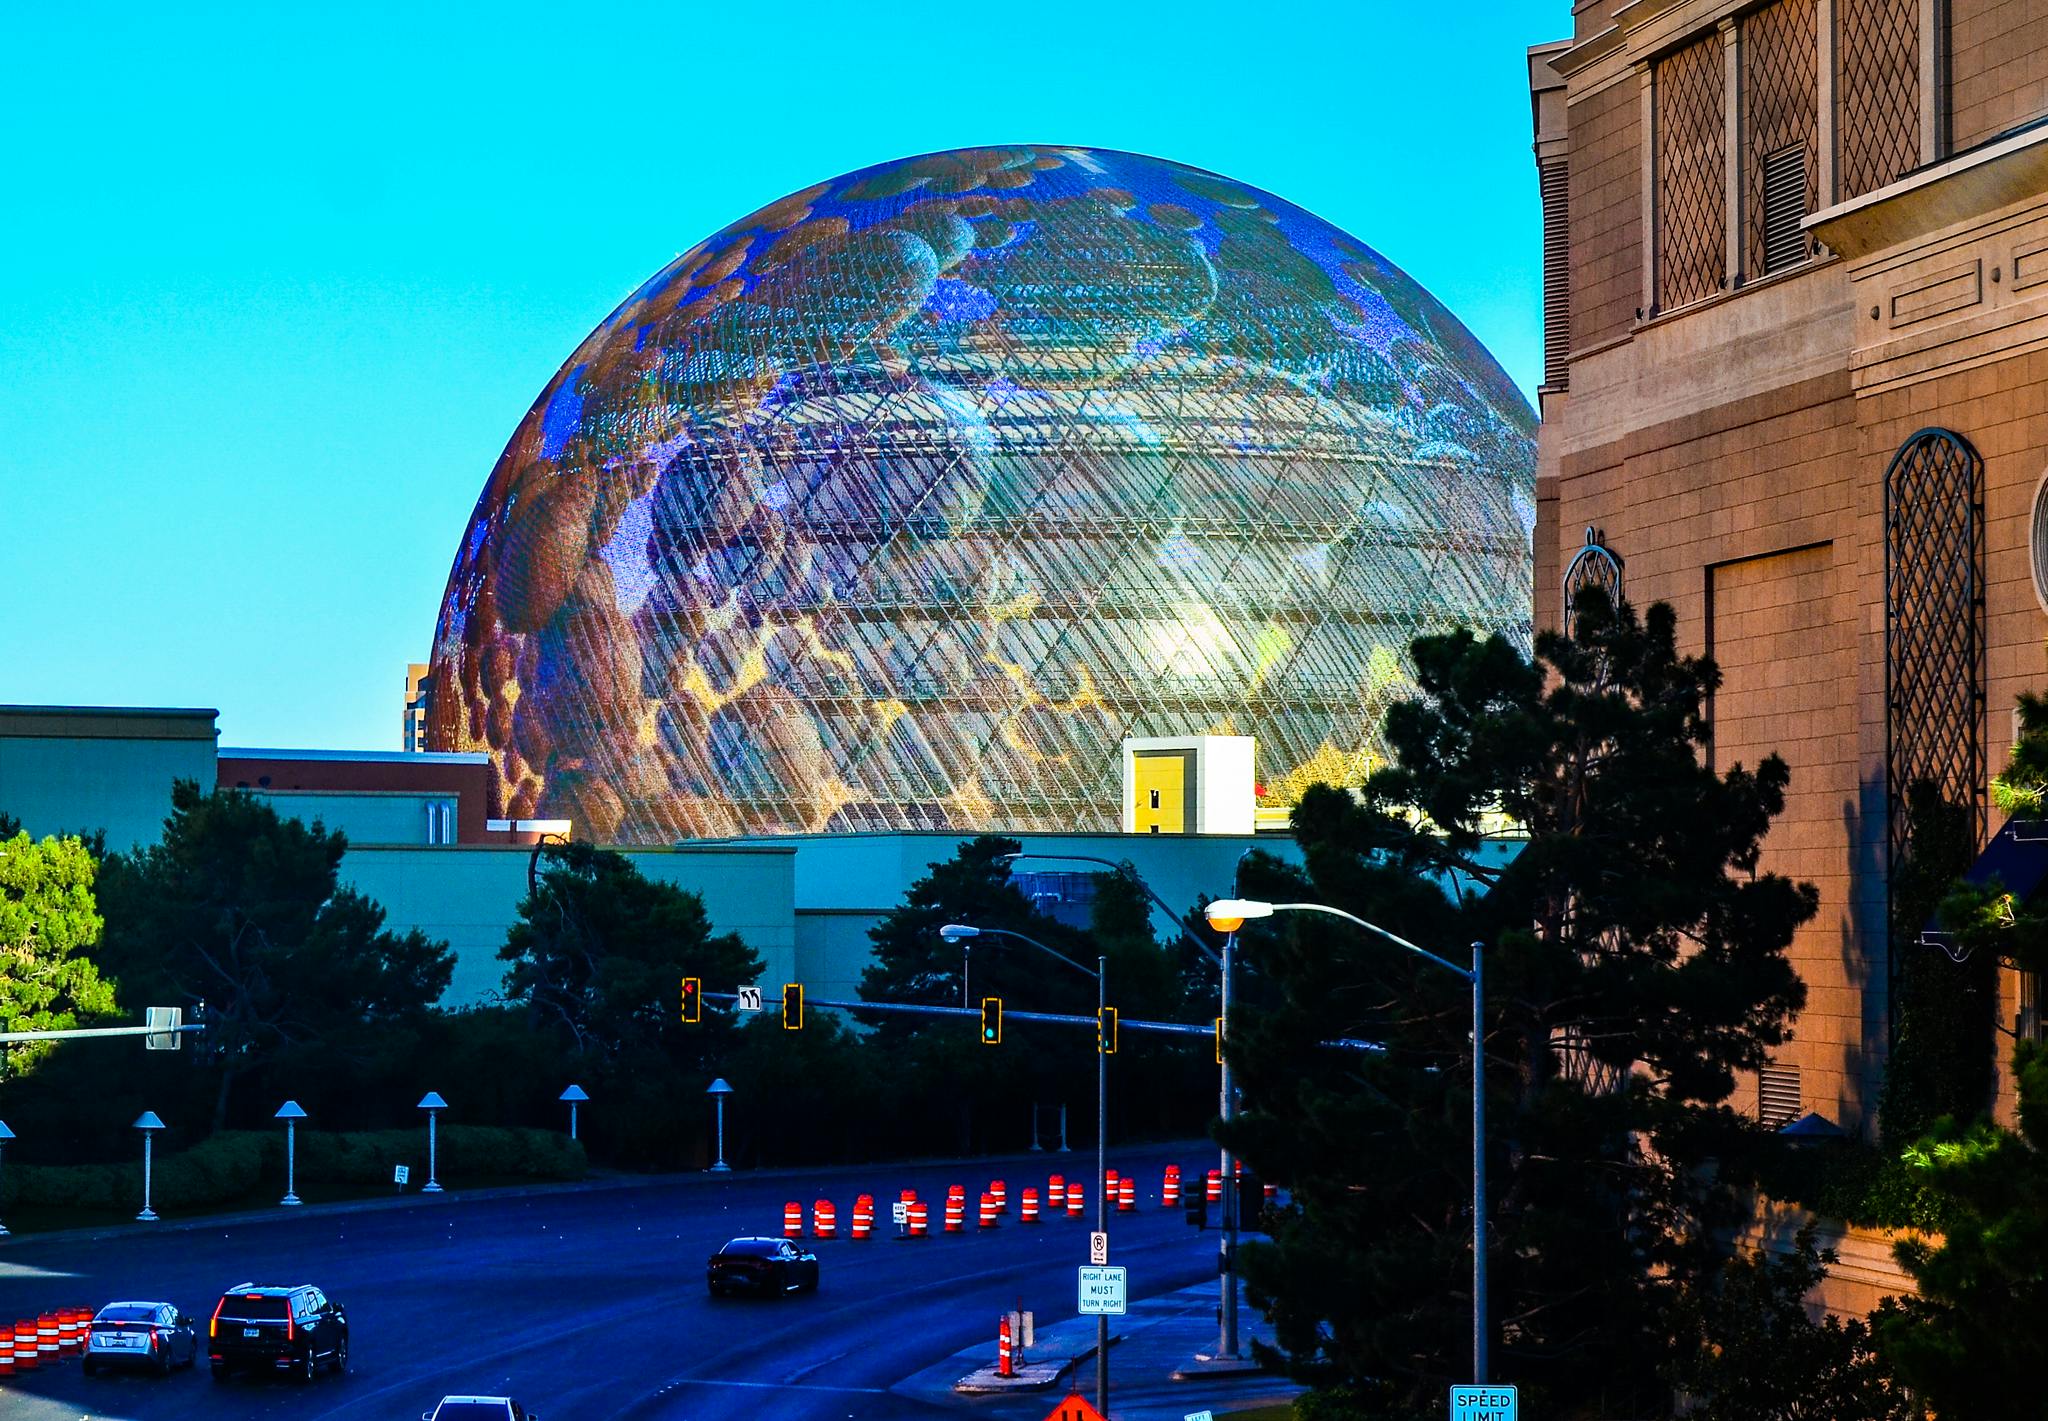 Las Vegas Sphere Technology: How It Works & What It Means for